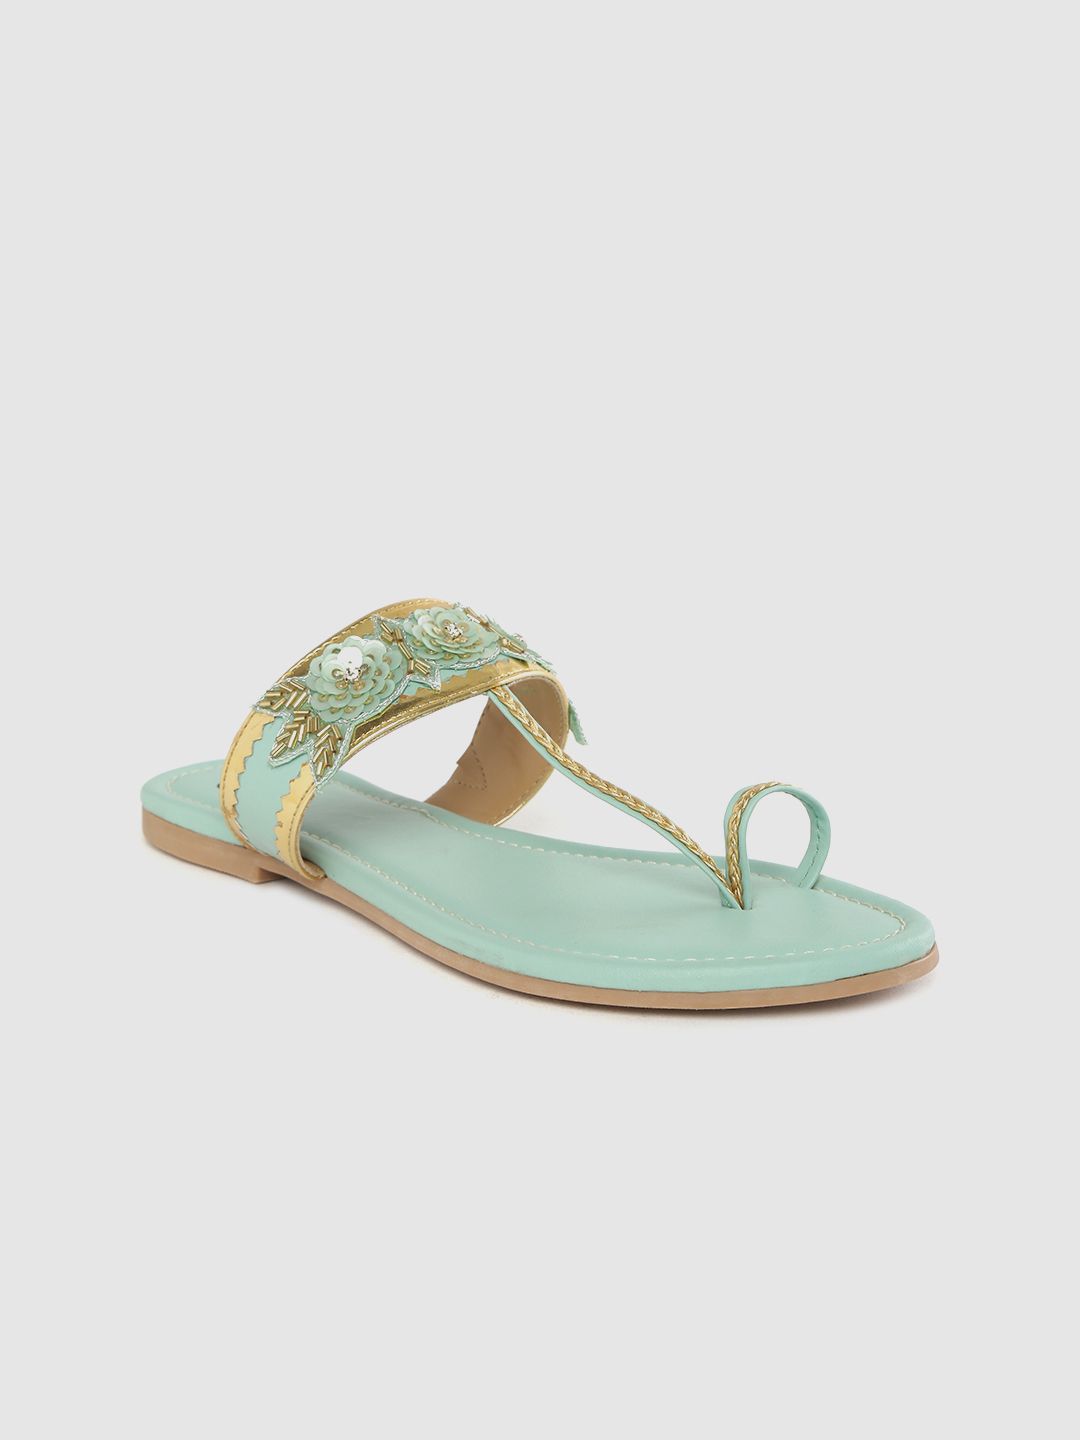 Carlton London Women Sea Green & Gold-Toned Embellished Braided One Toe Flats Price in India